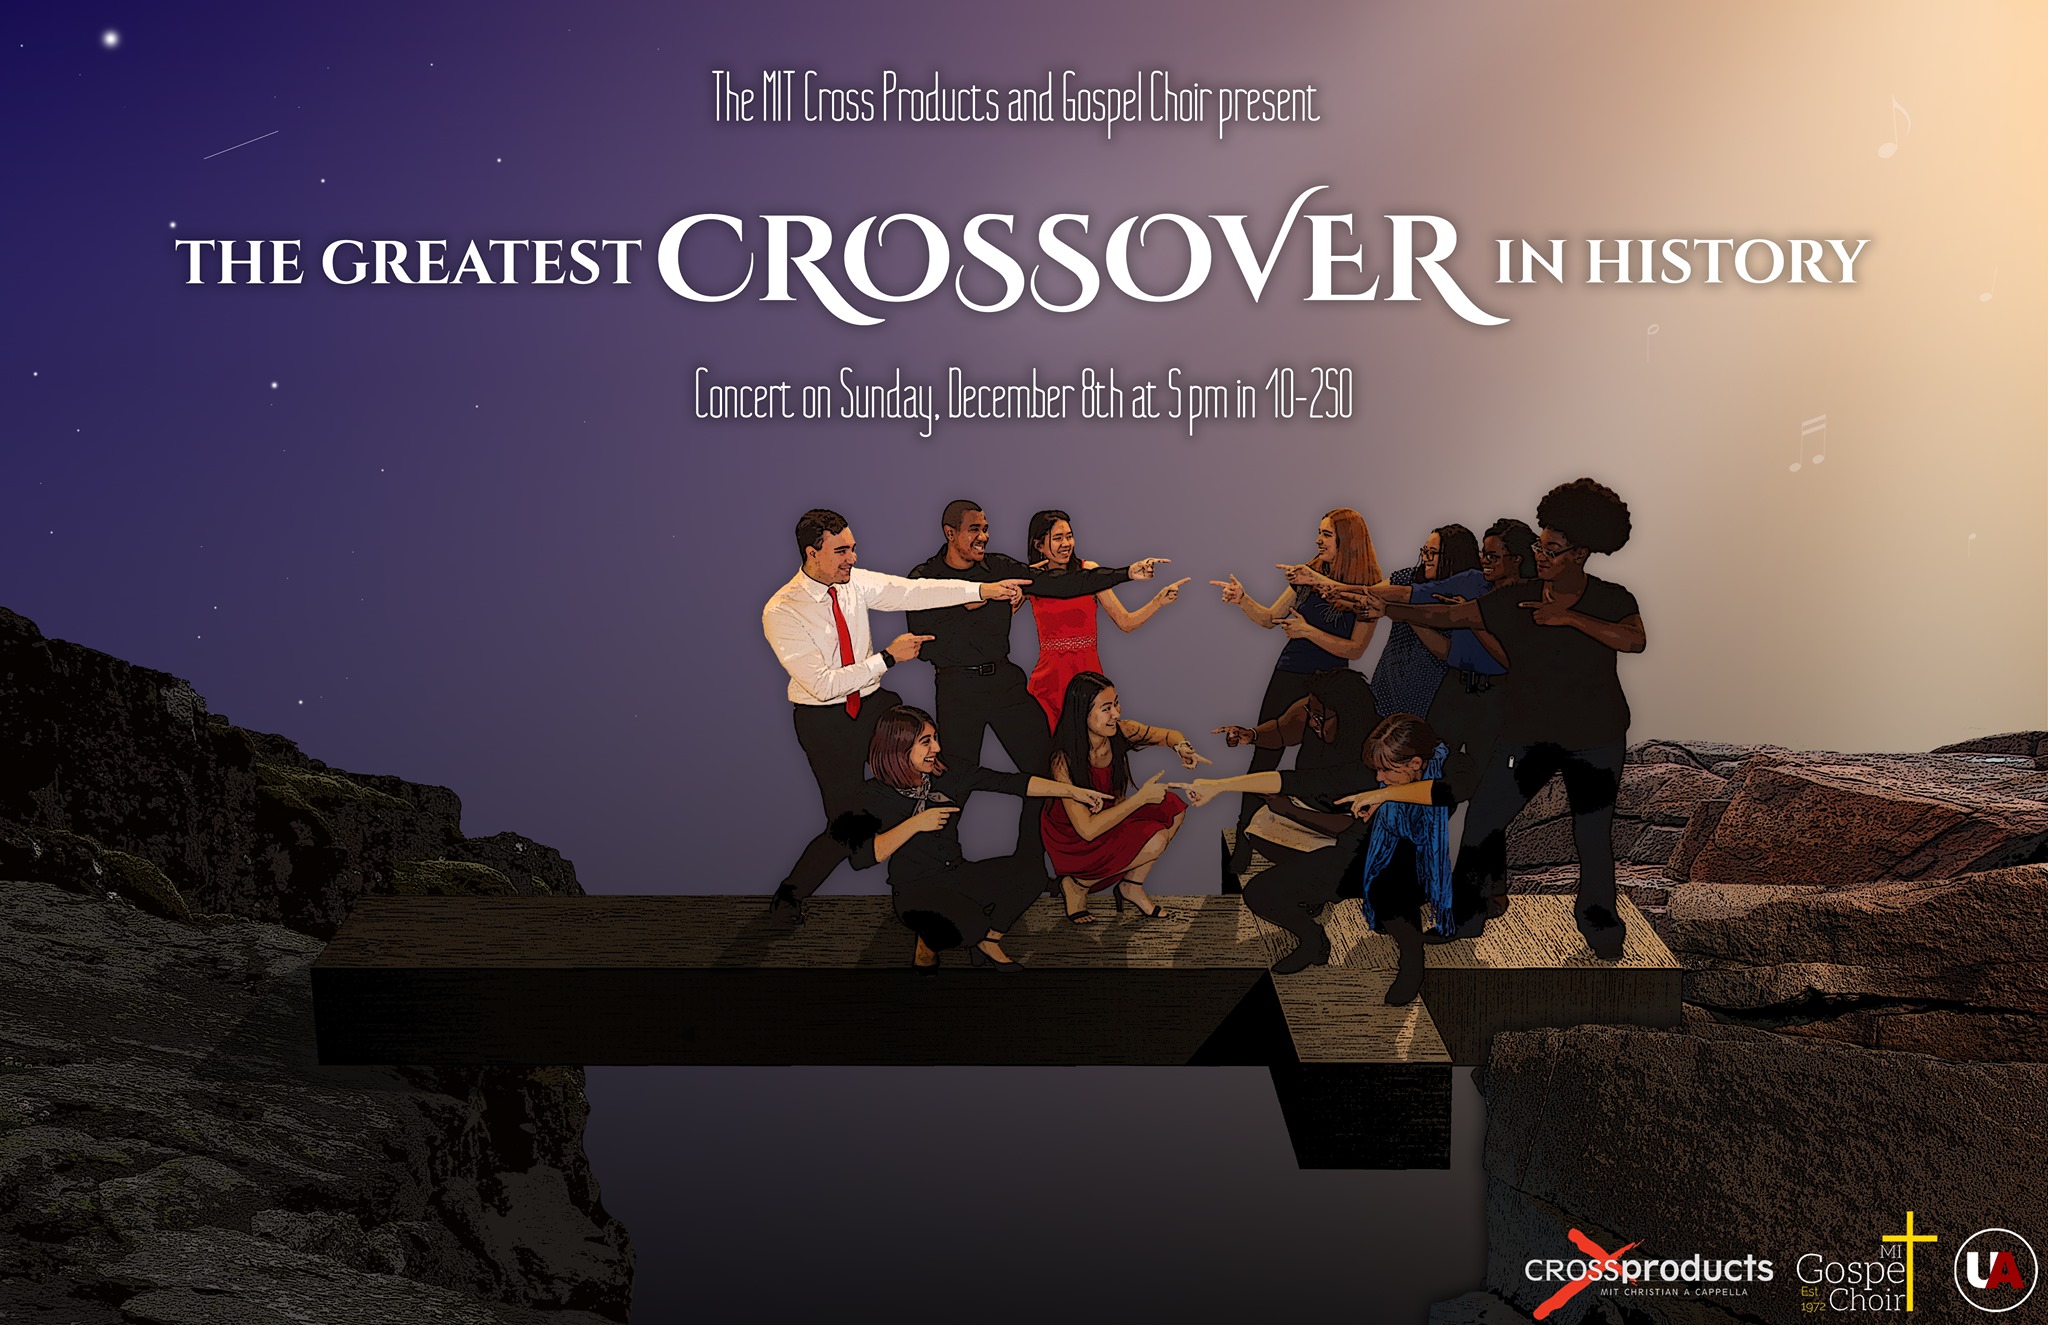 The MIT Cross Products and Gospel Choir present The Greatest Crossover In History concert on Sunday, December 8th at 5 p.m. in 10-250.